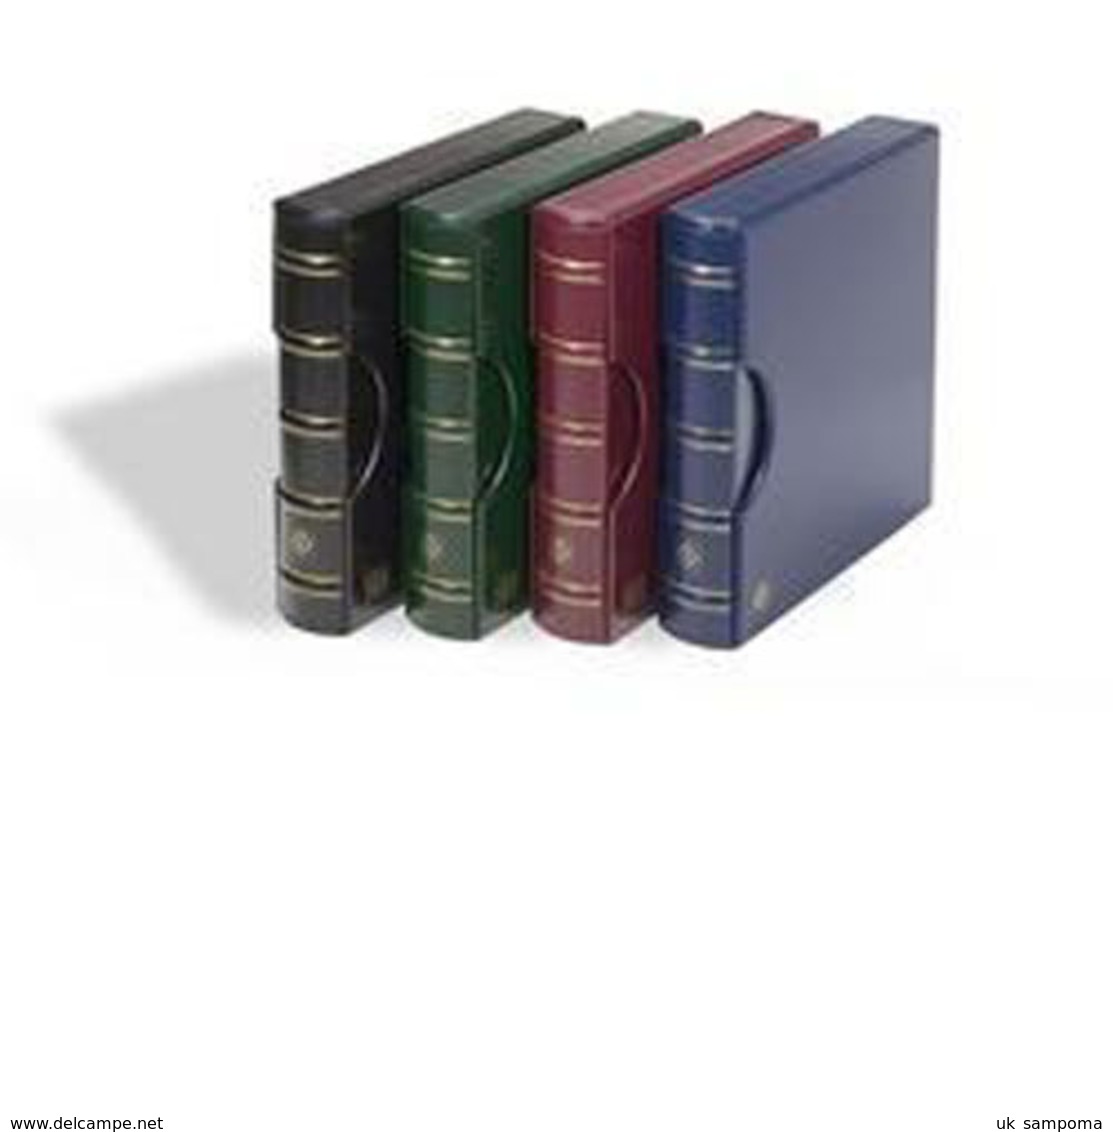 LIGHTHOUSE Ring Binder EXCELLENT DE, In Classic Design With Slipcase, Red - Grand Format, Fond Noir